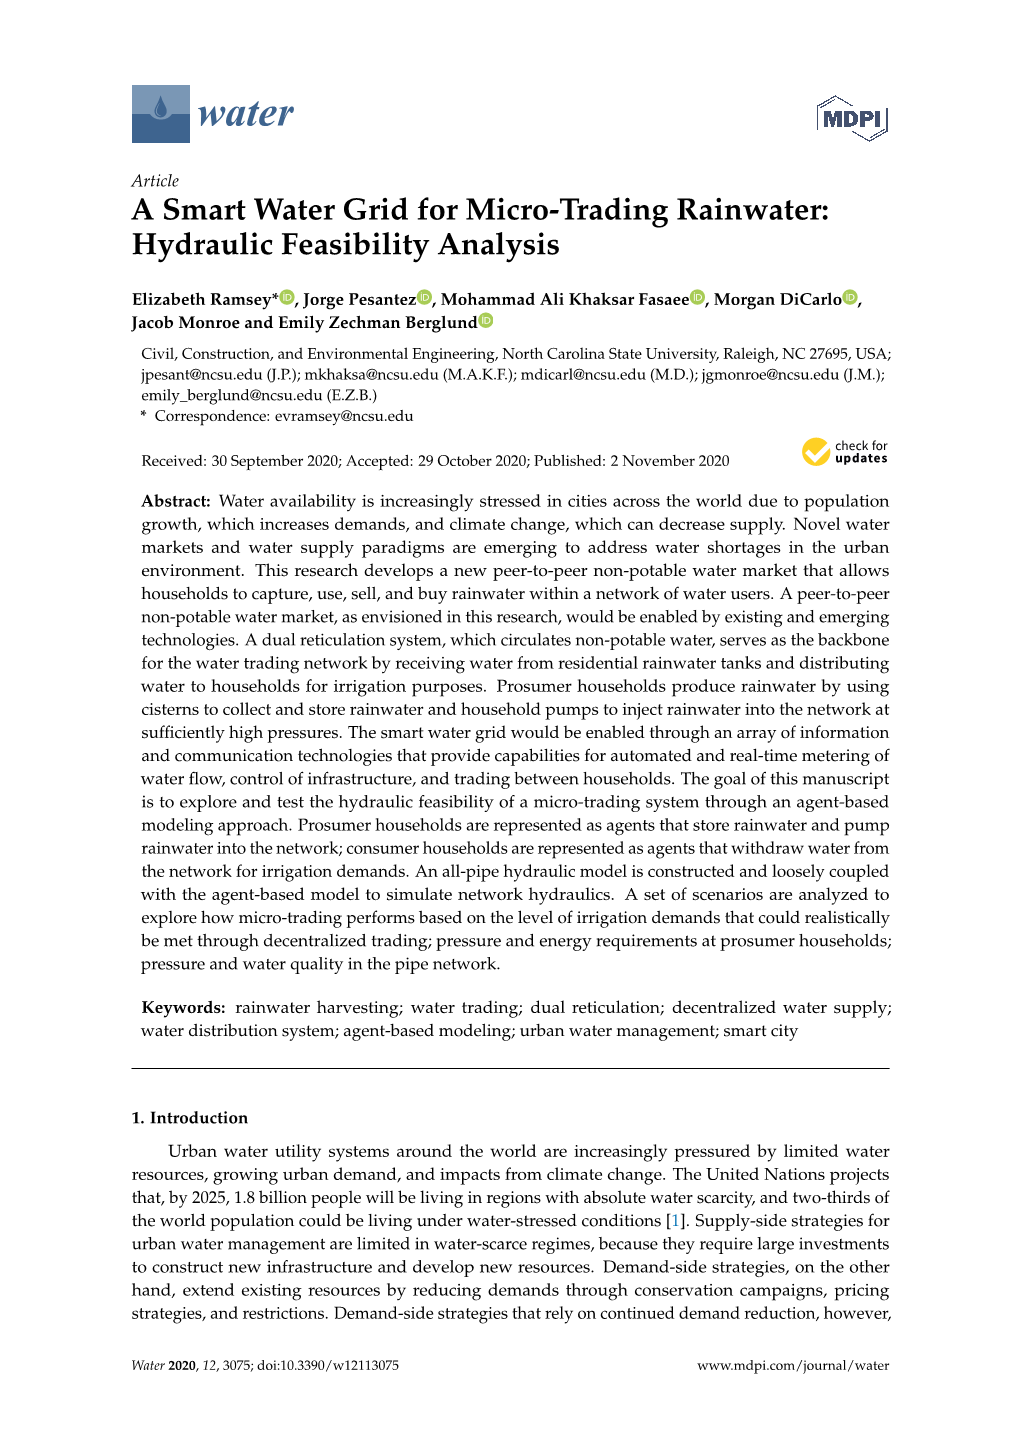 A Smart Water Grid for Micro-Trading Rainwater: Hydraulic Feasibility Analysis